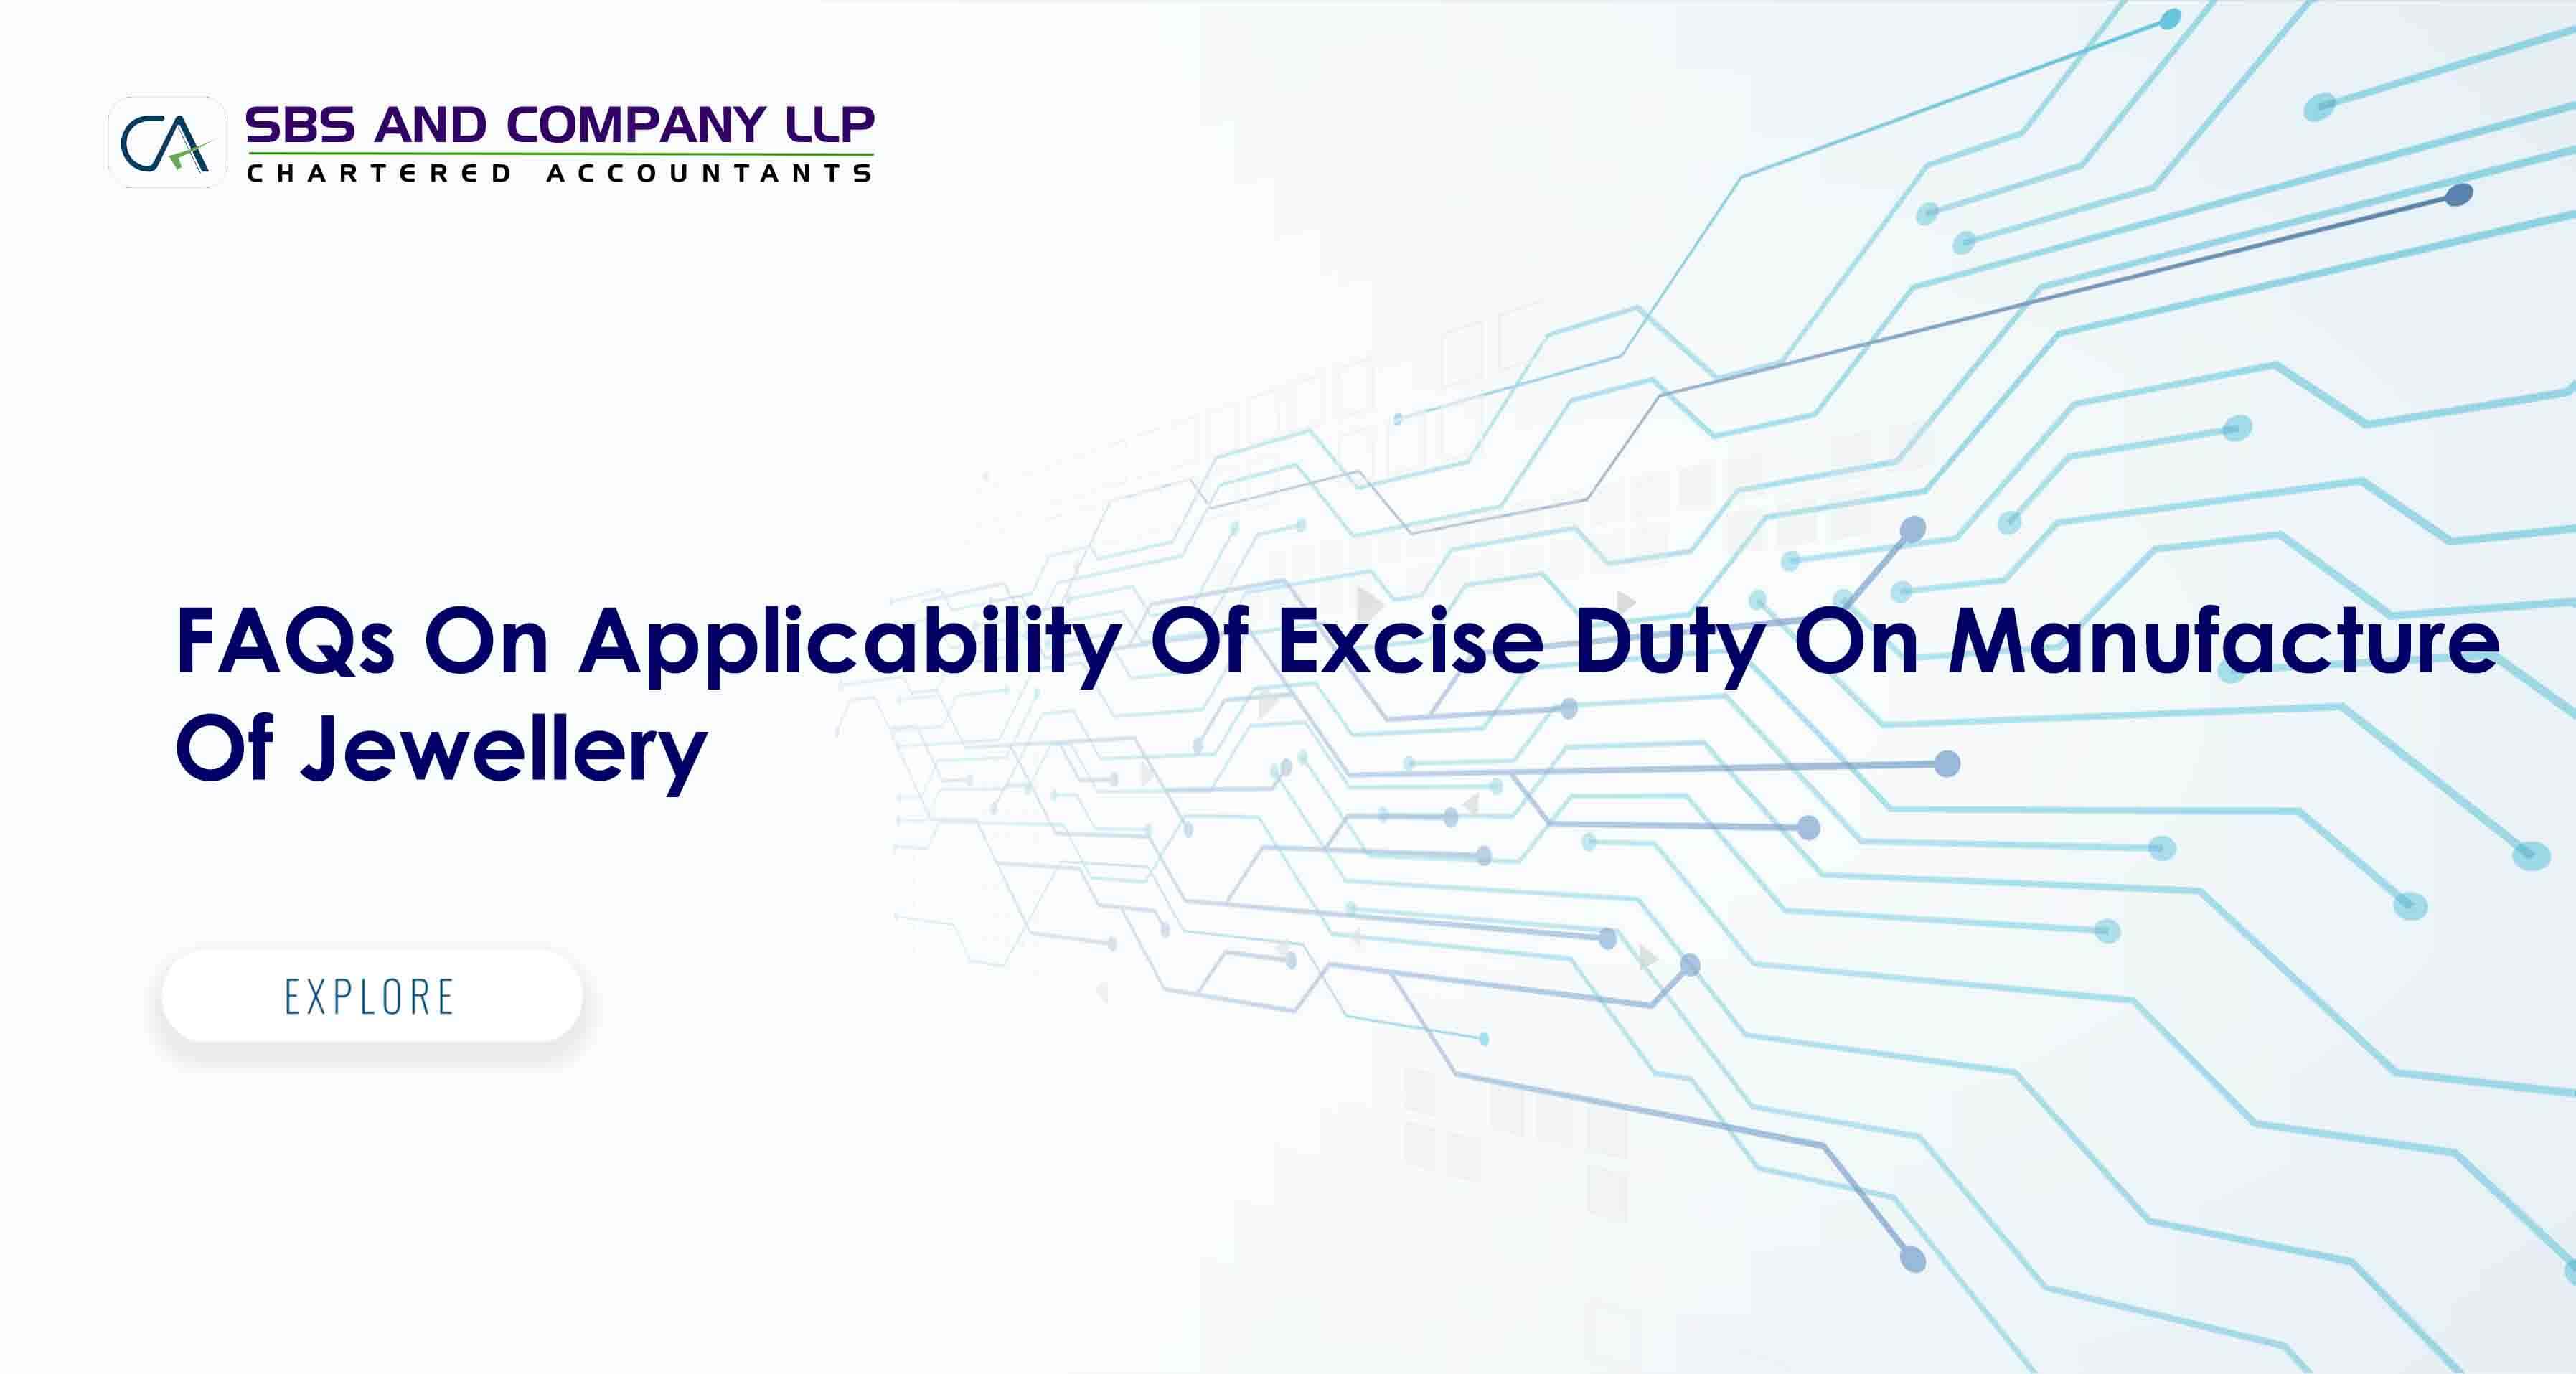 FAQs On Applicability Of Excise Duty On Manufacture Of Jewellery